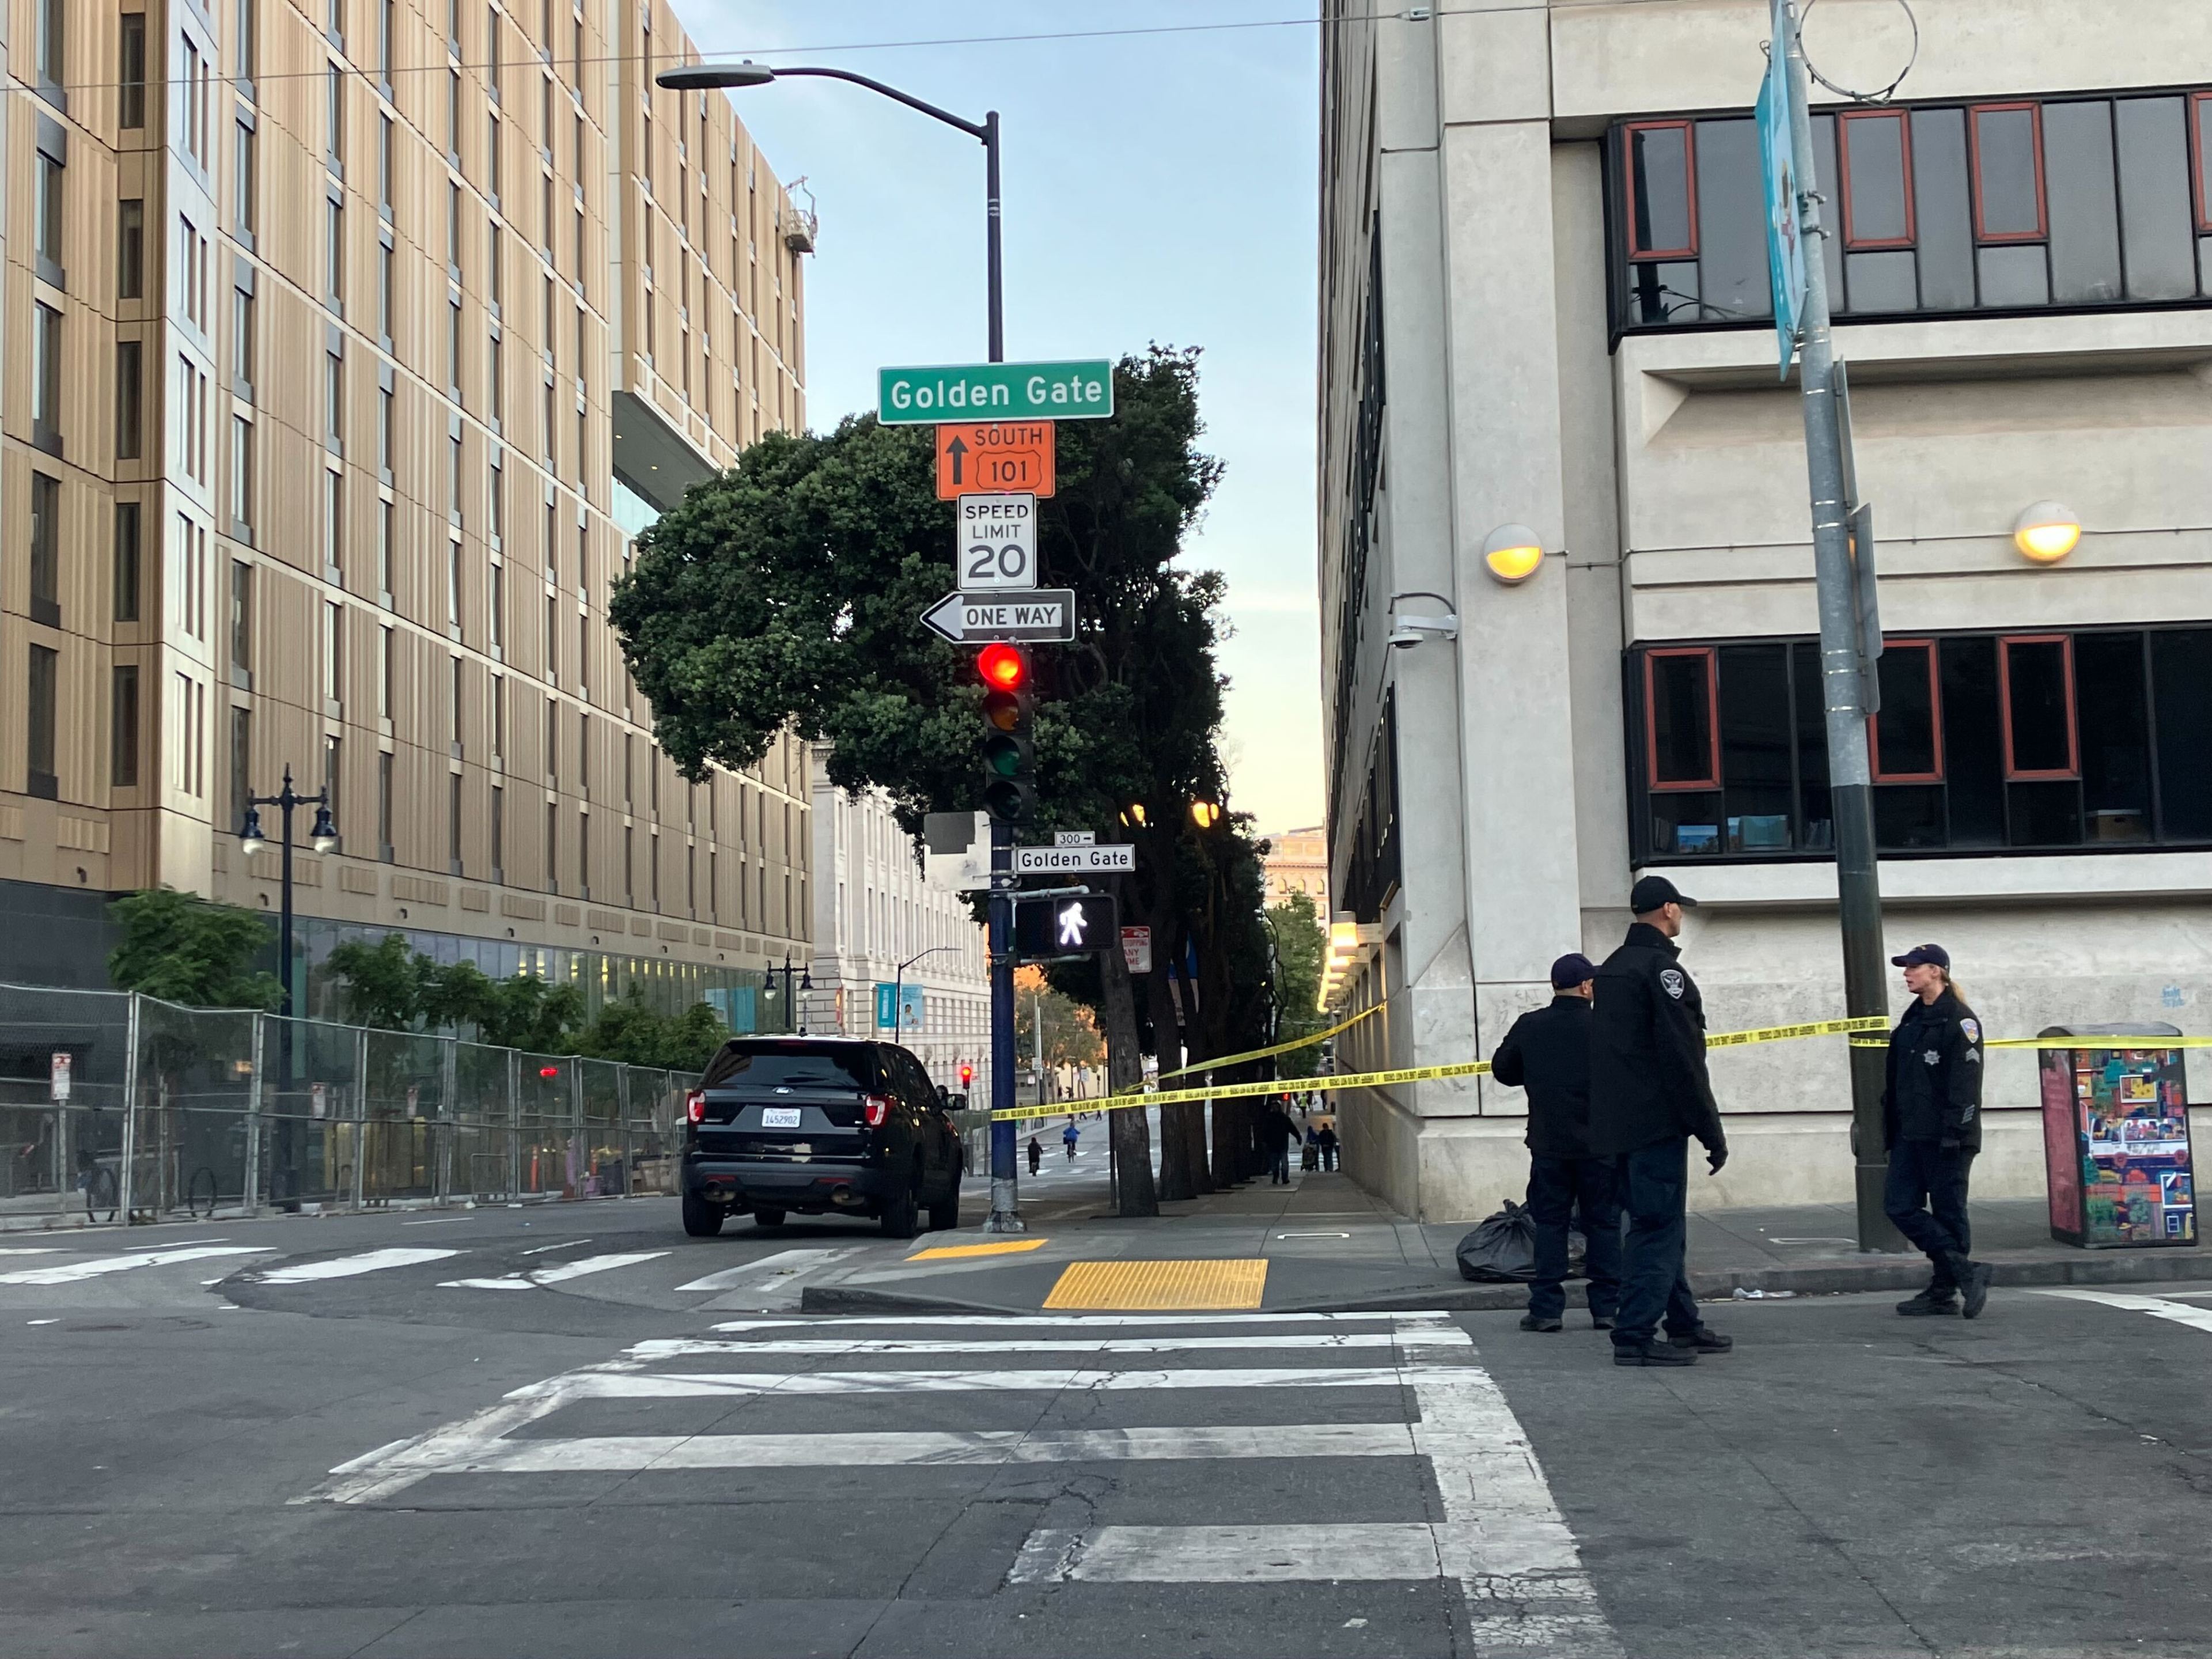 Urban street corner with police officers, a caution tape barrier, and a parked SUV. Street signs indicate "Golden Gate" and route "101 South."